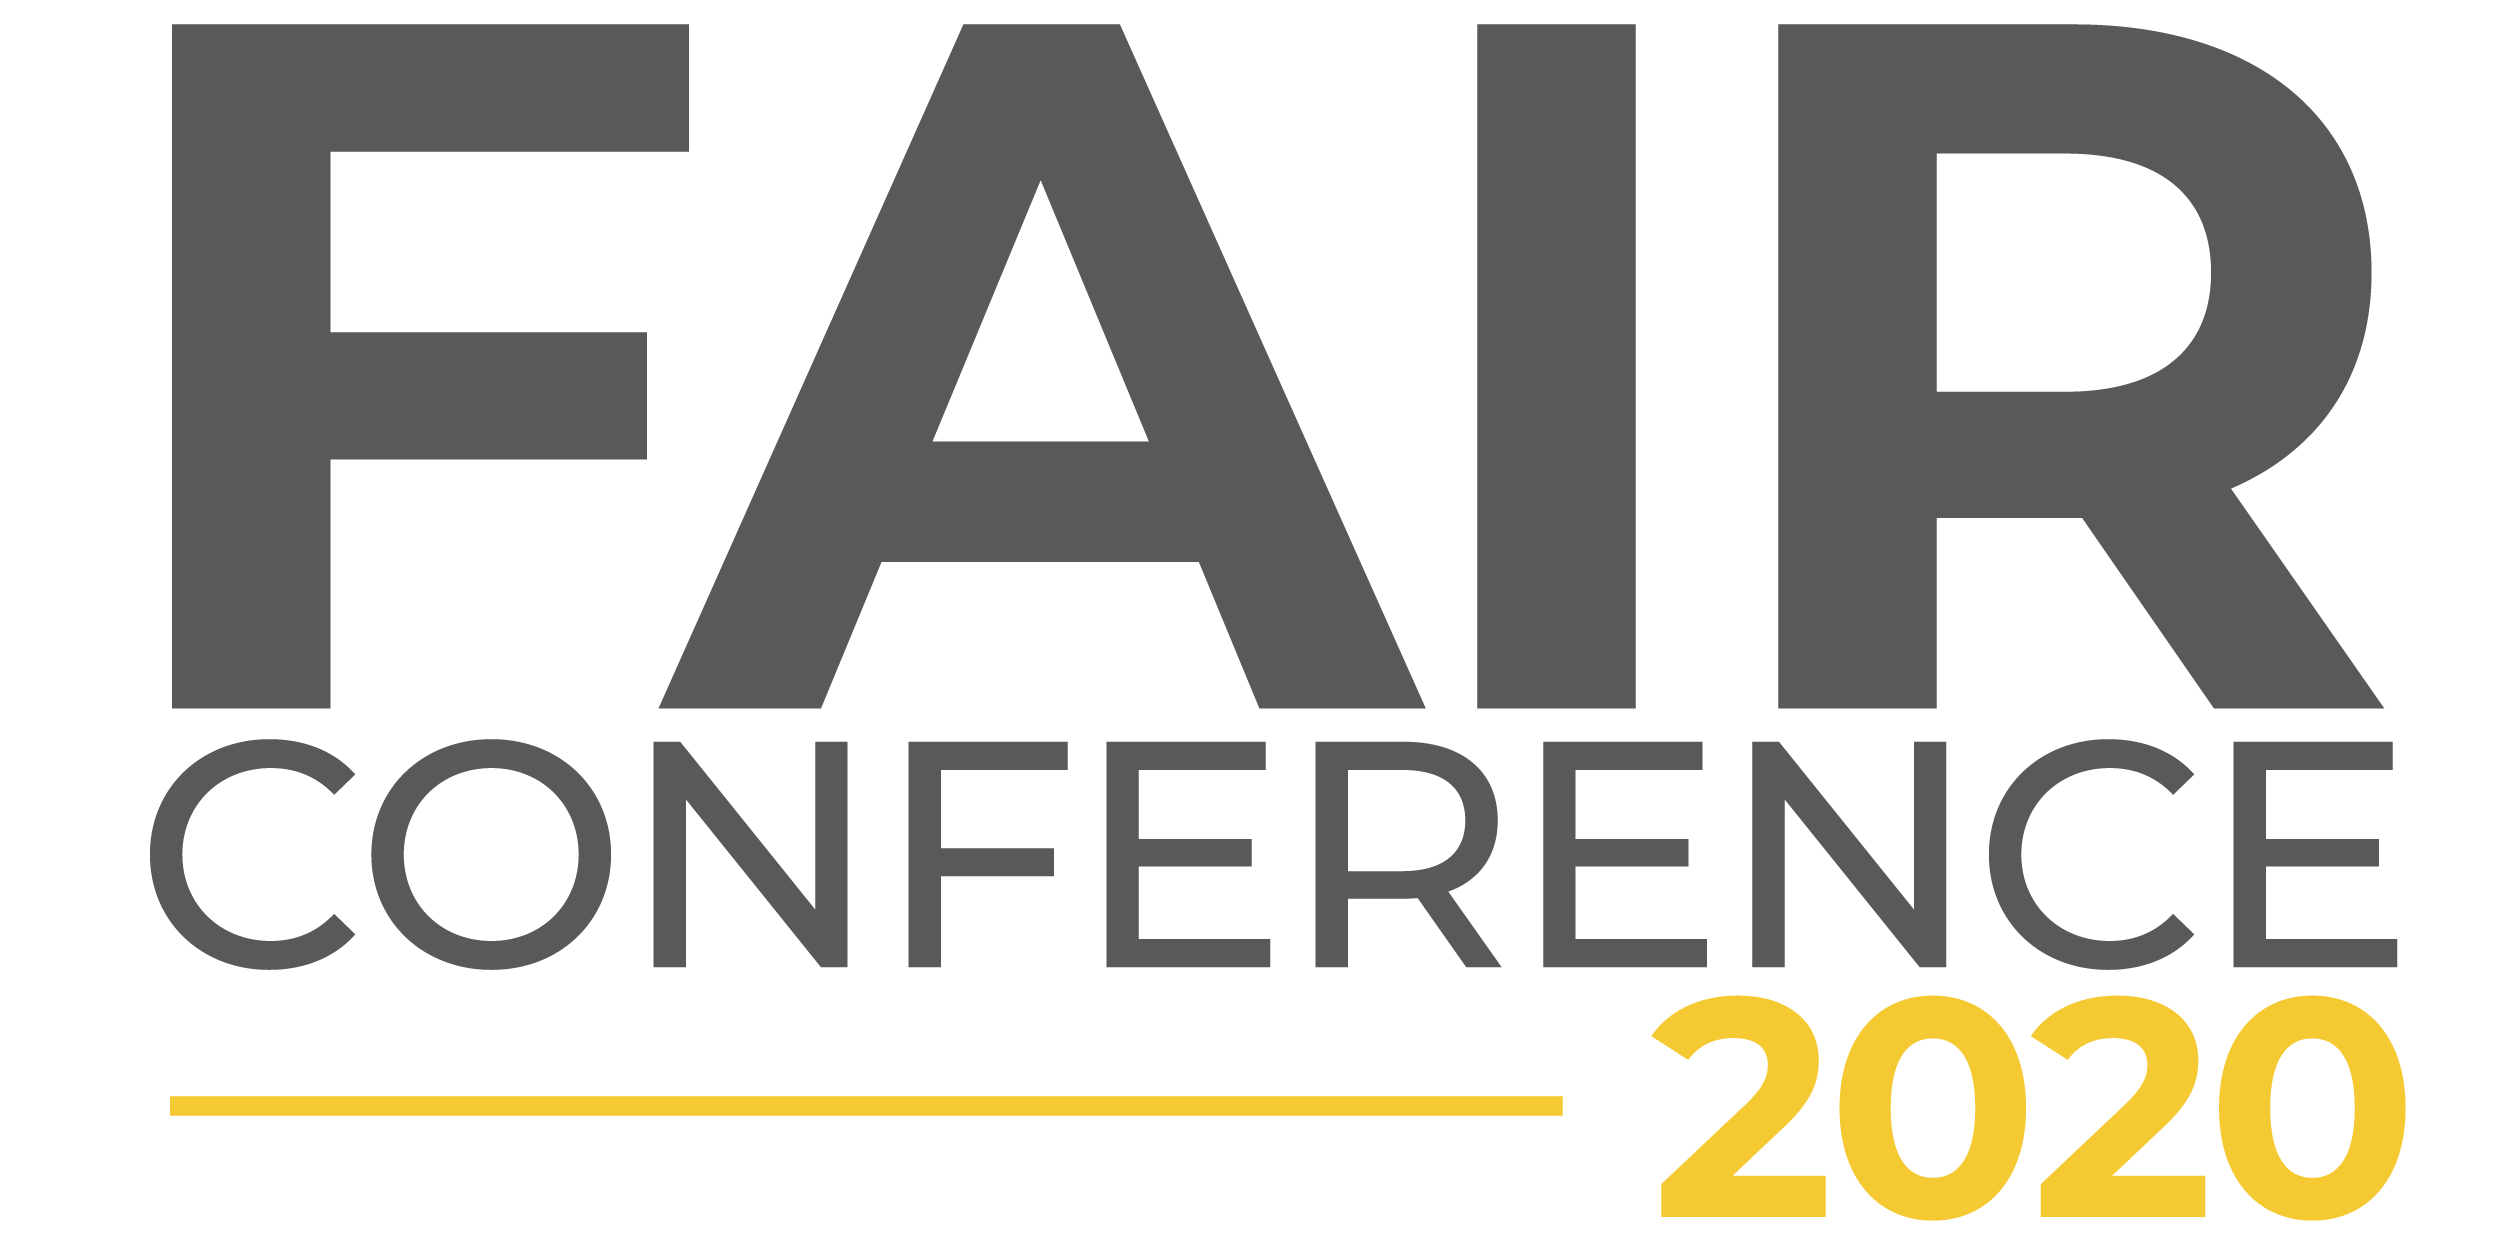 FAIR Institute Announces 2020 Winners of Annual Excellence Awards at FAIR Conference